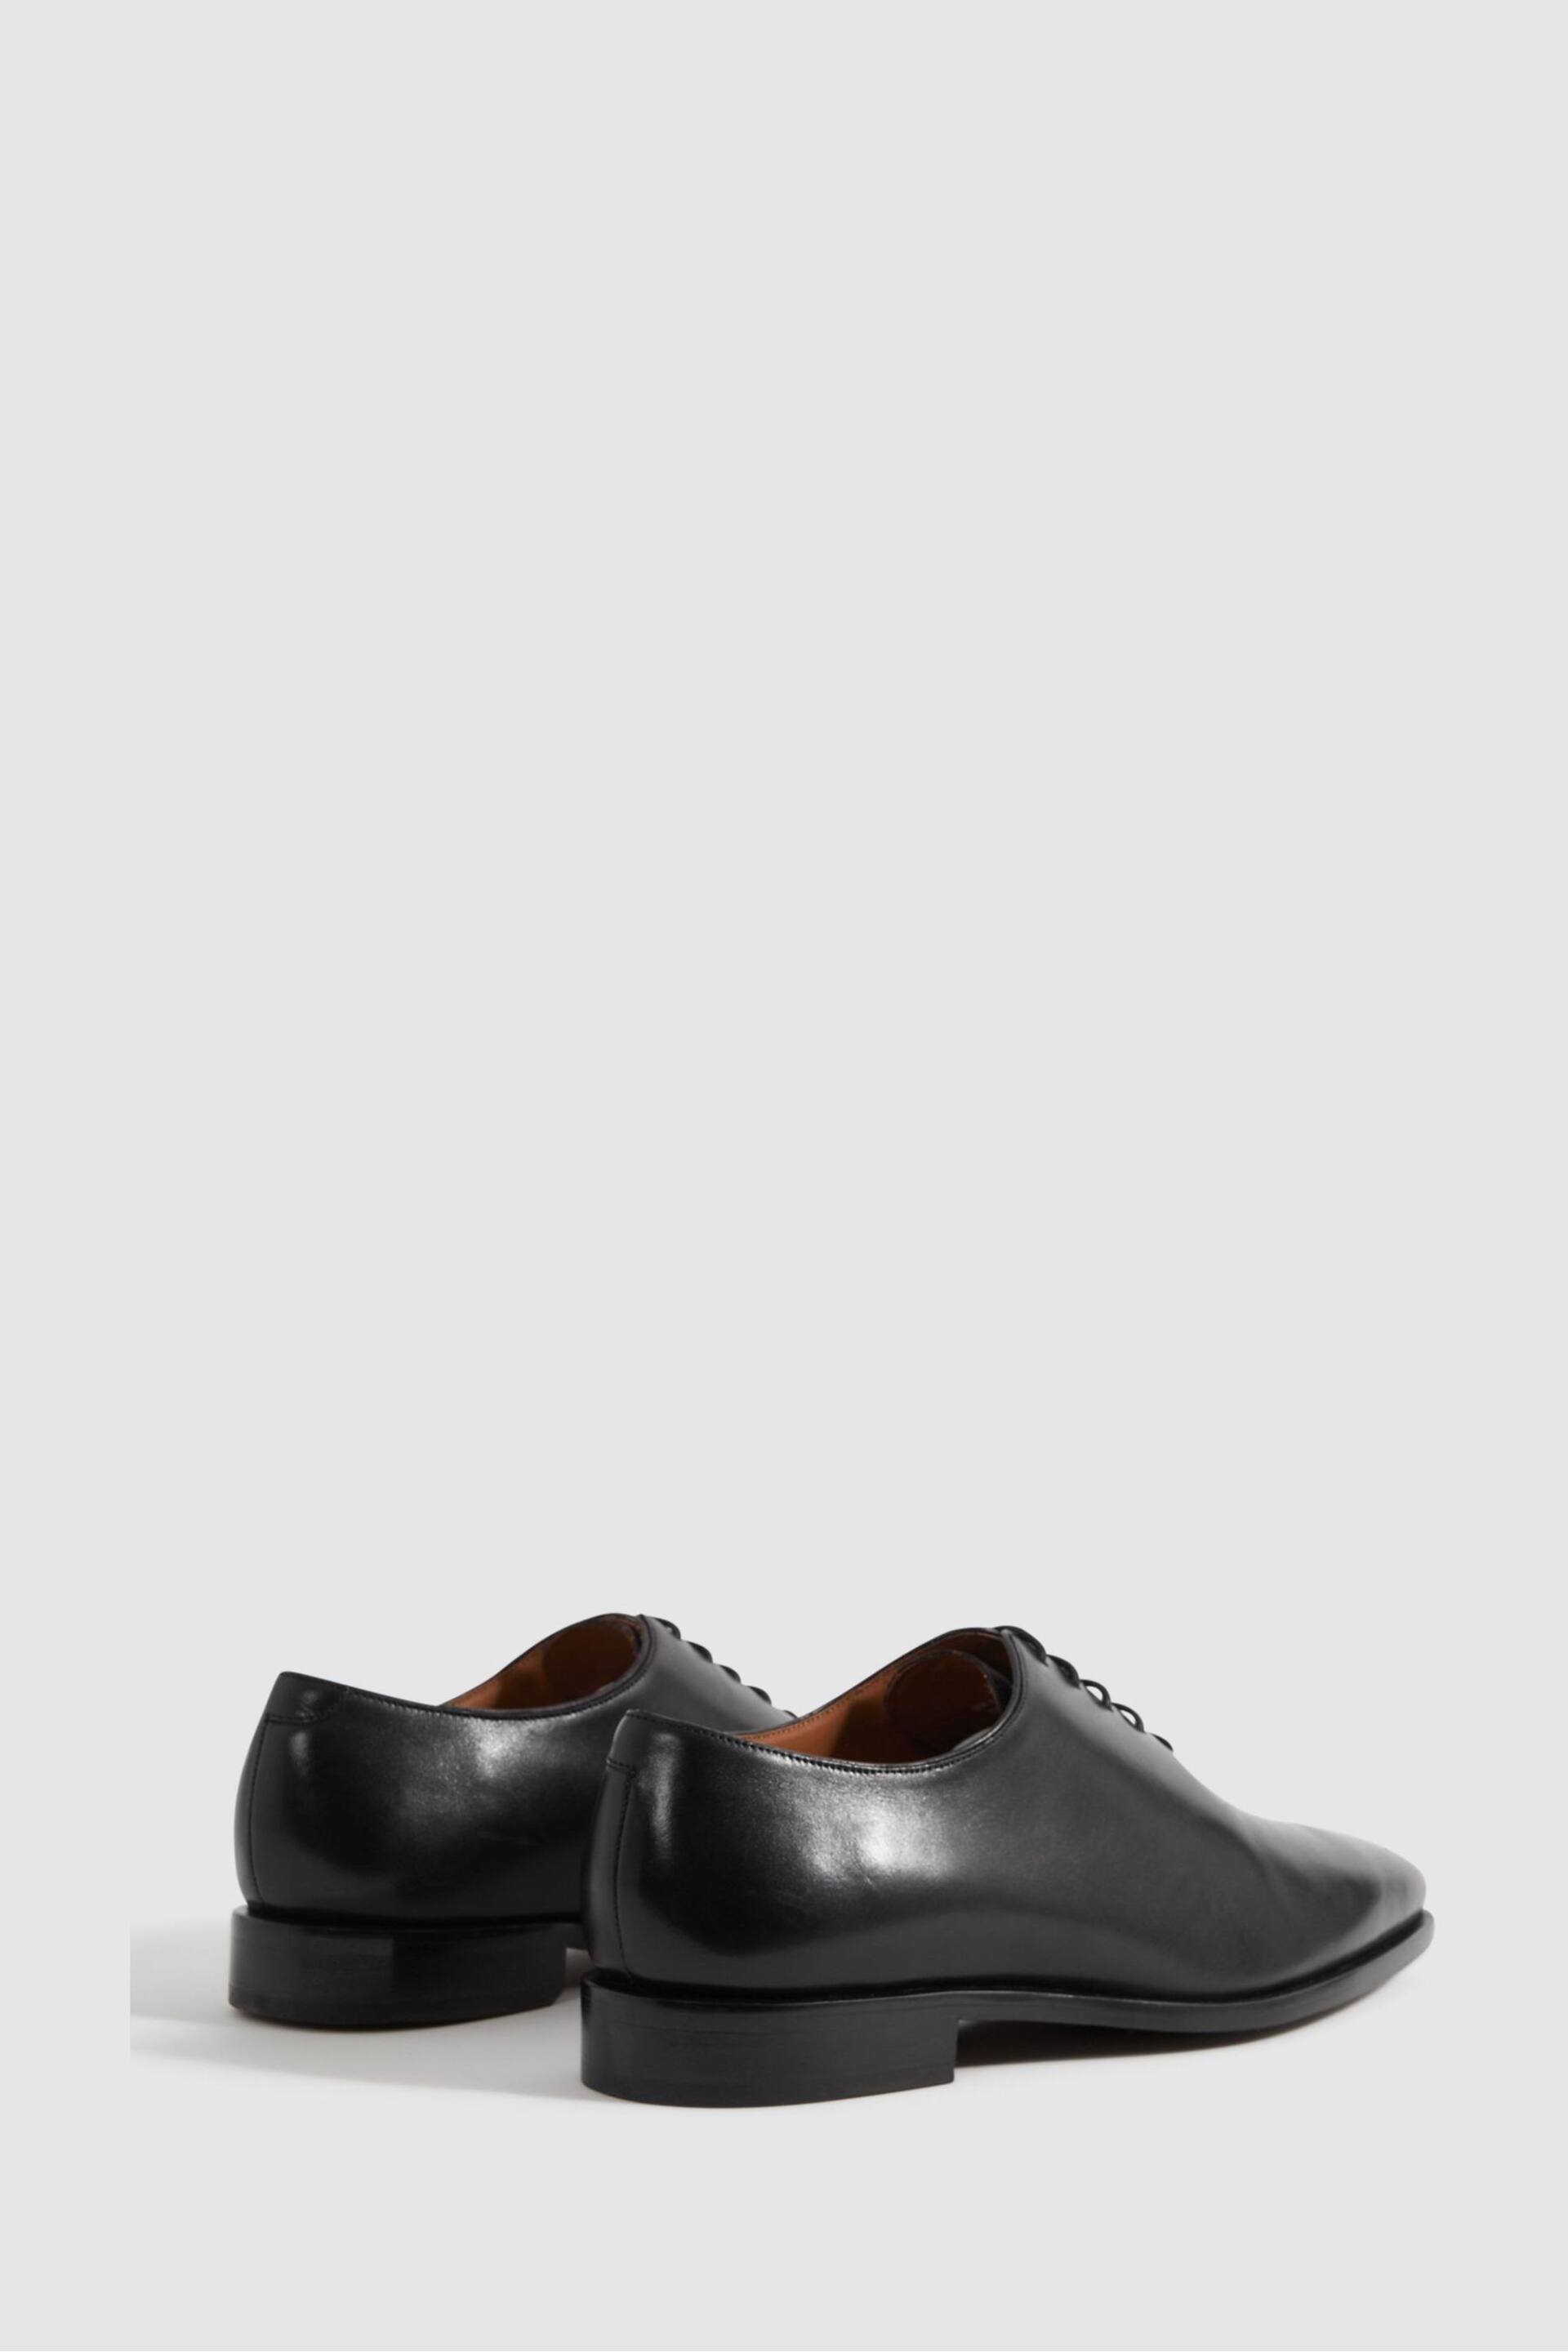 Reiss Black Mead Leather Lace-Up Shoes - Image 4 of 5